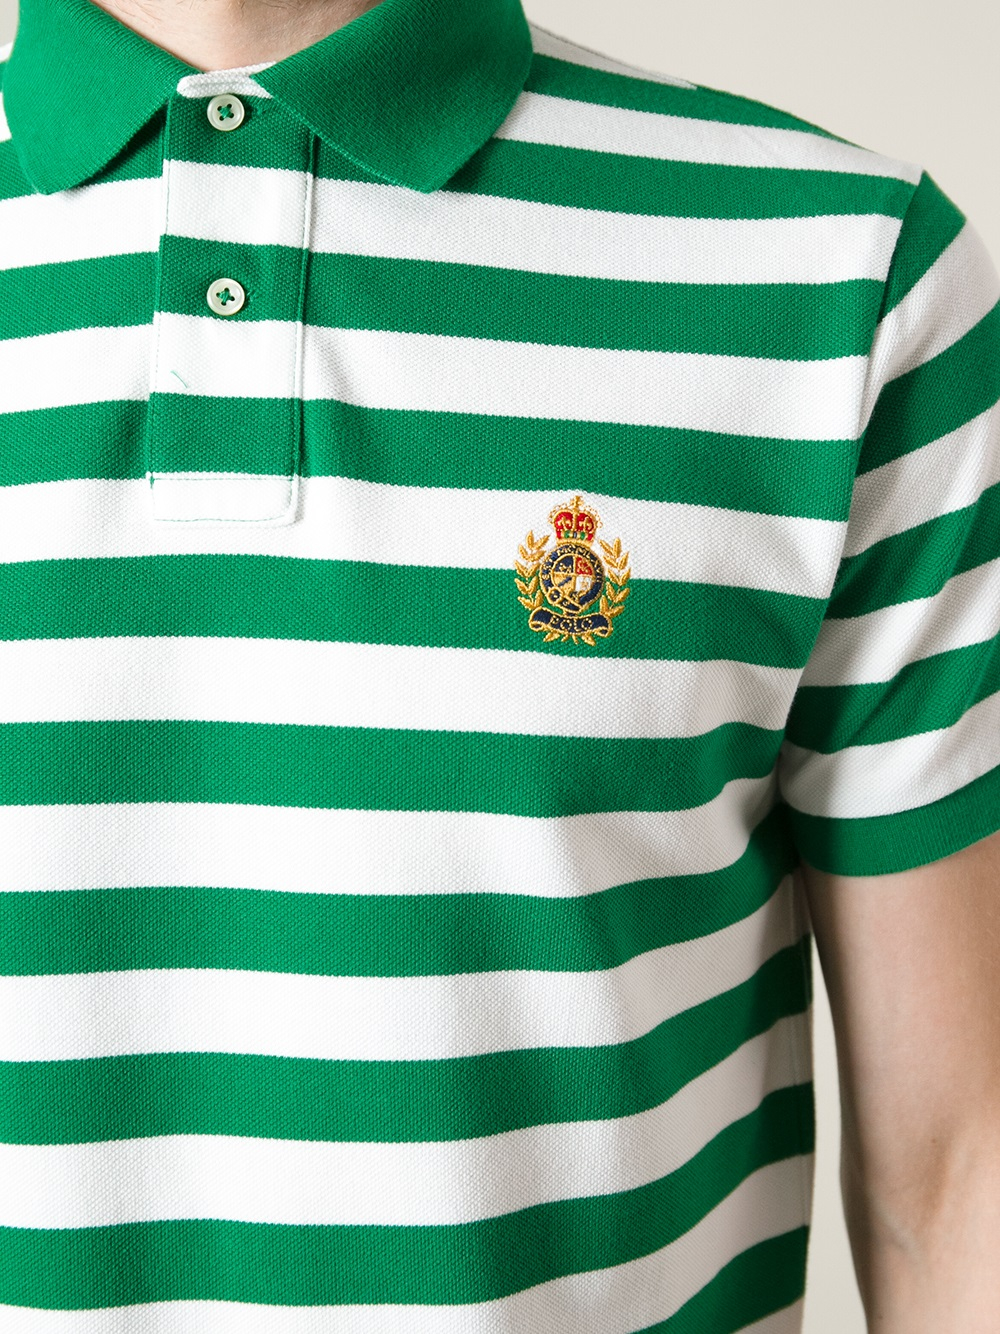 green and white striped polo shirt